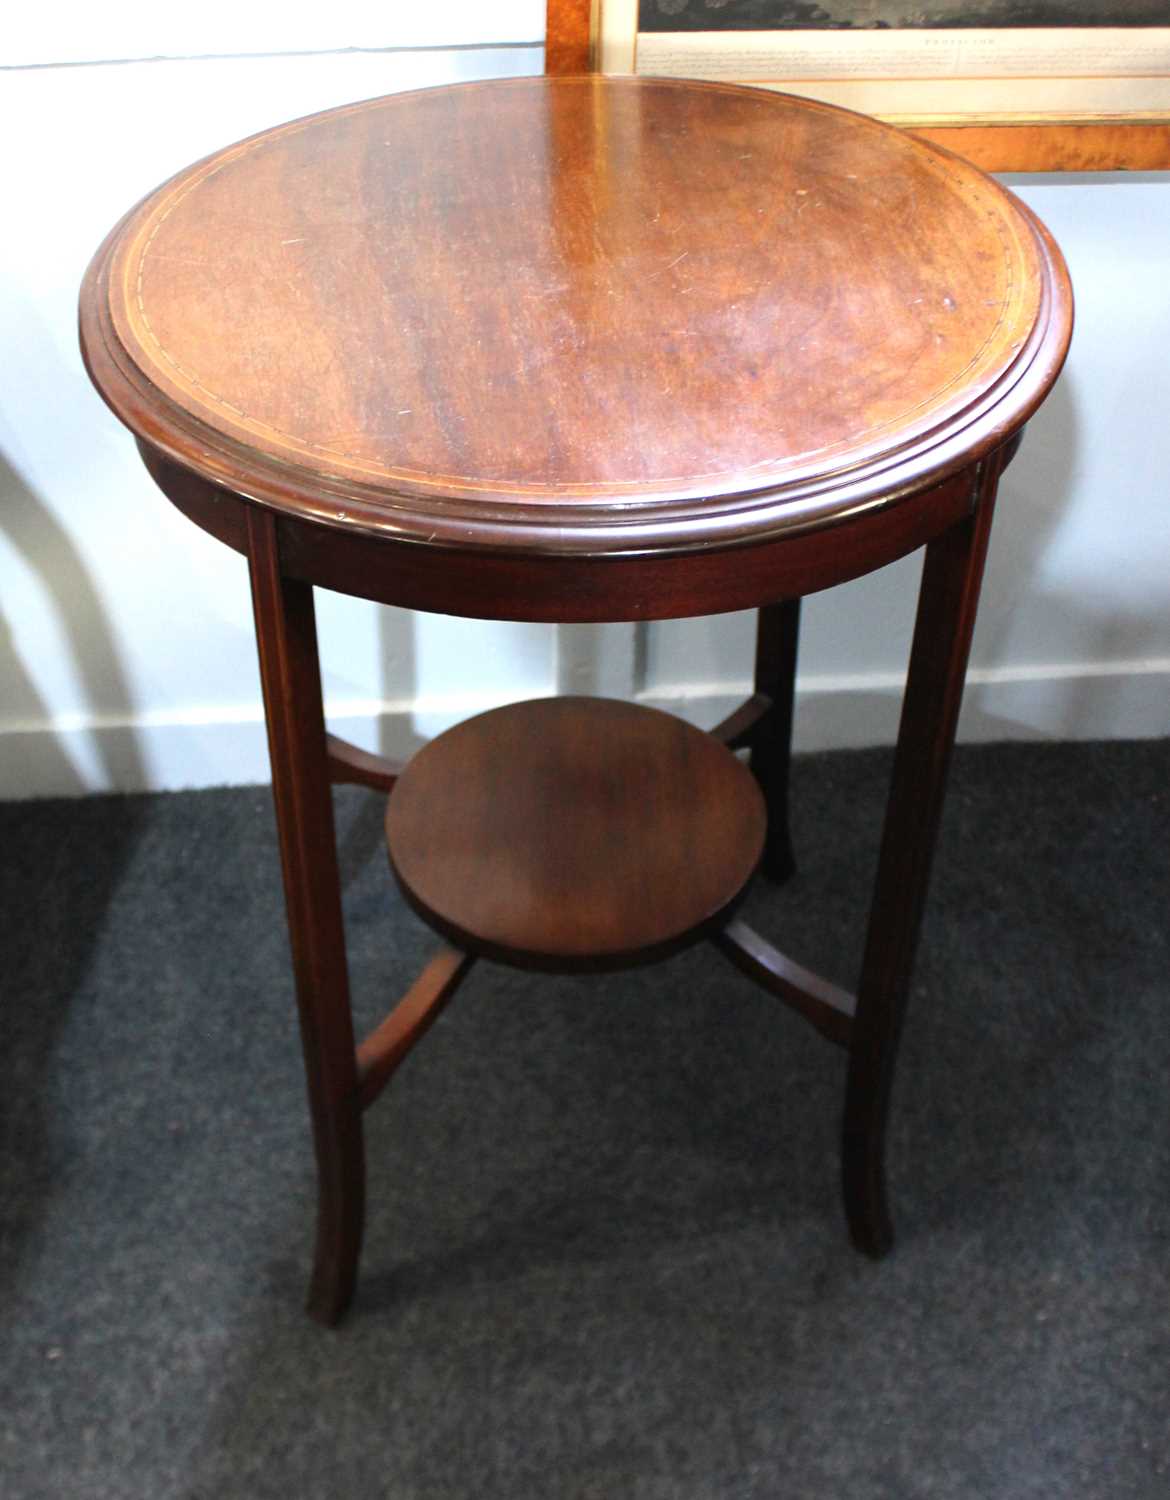 An Edwardian inlaid mahogany circular two tier side table, c.1900/1910, raised on elegant outswept